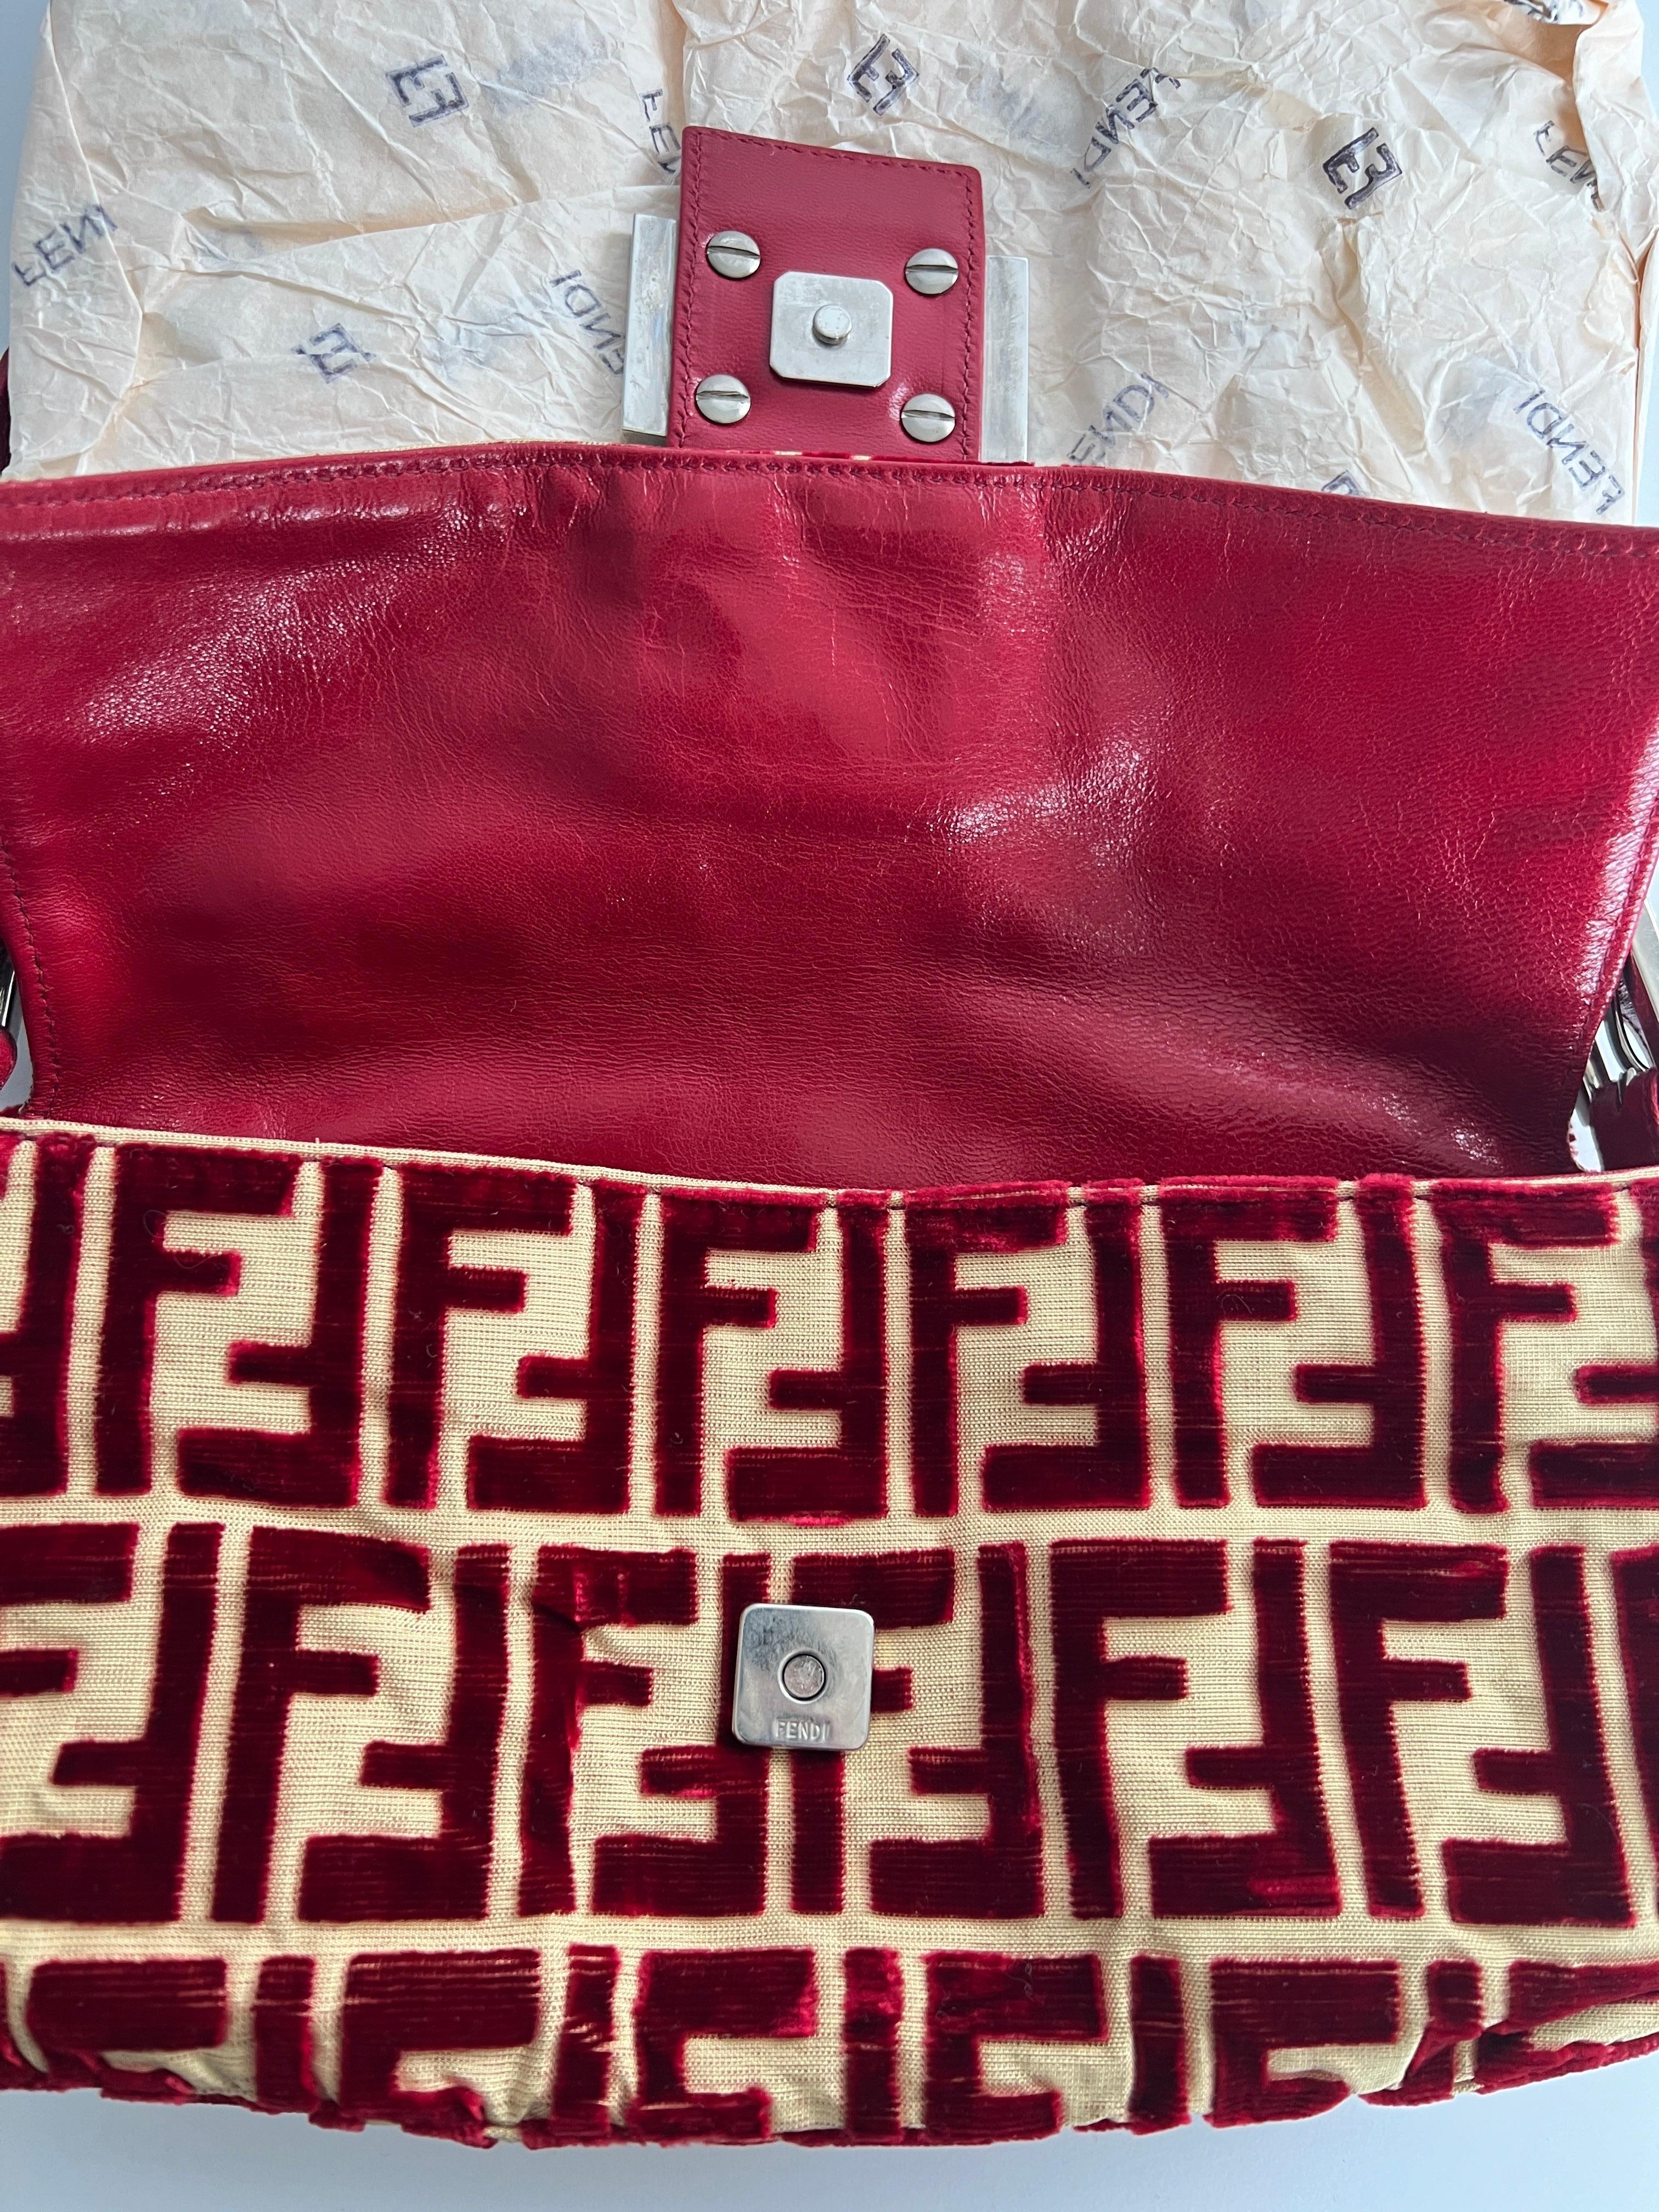 Extremely rare Fendi red velvet baguette by Lisio For Sale 2